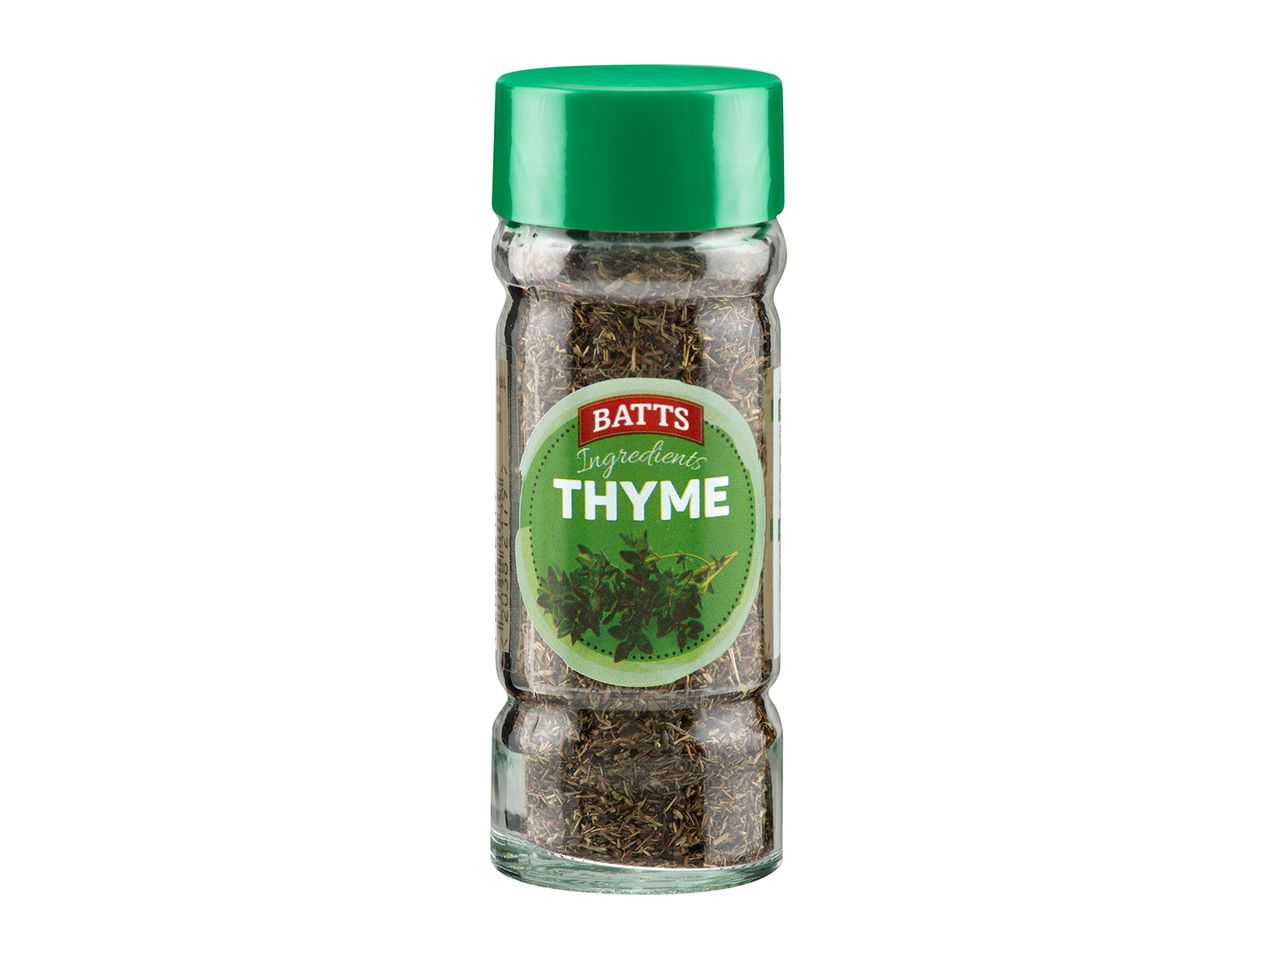 Go to full screen view: Batts Thyme - Image 1